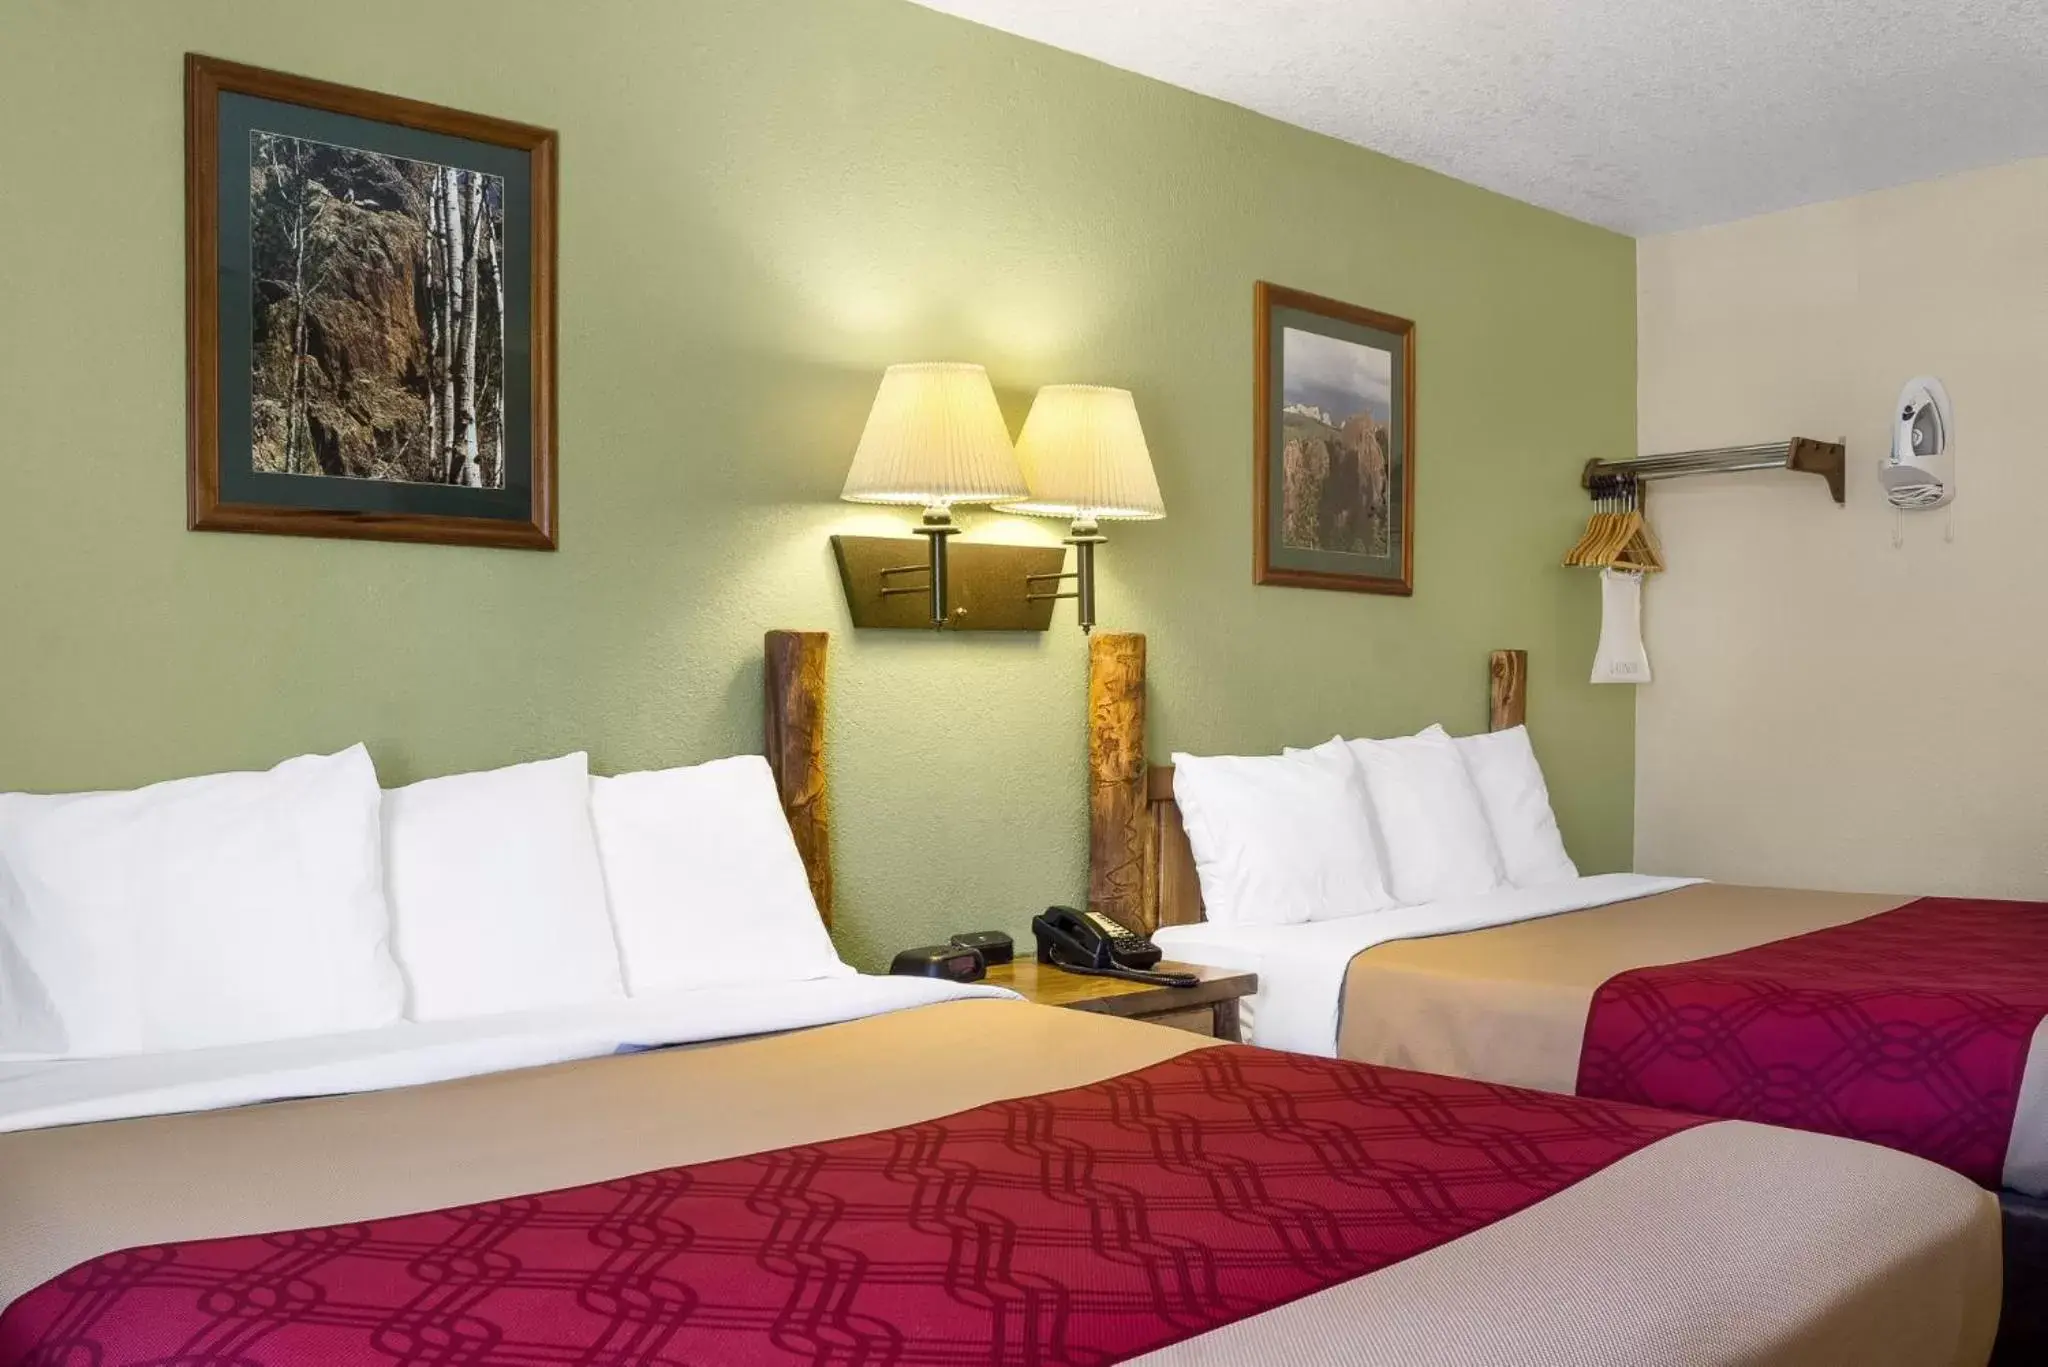 Bed, Room Photo in Econo Lodge, Downtown Custer Near Custer State Park and Mt Rushmore